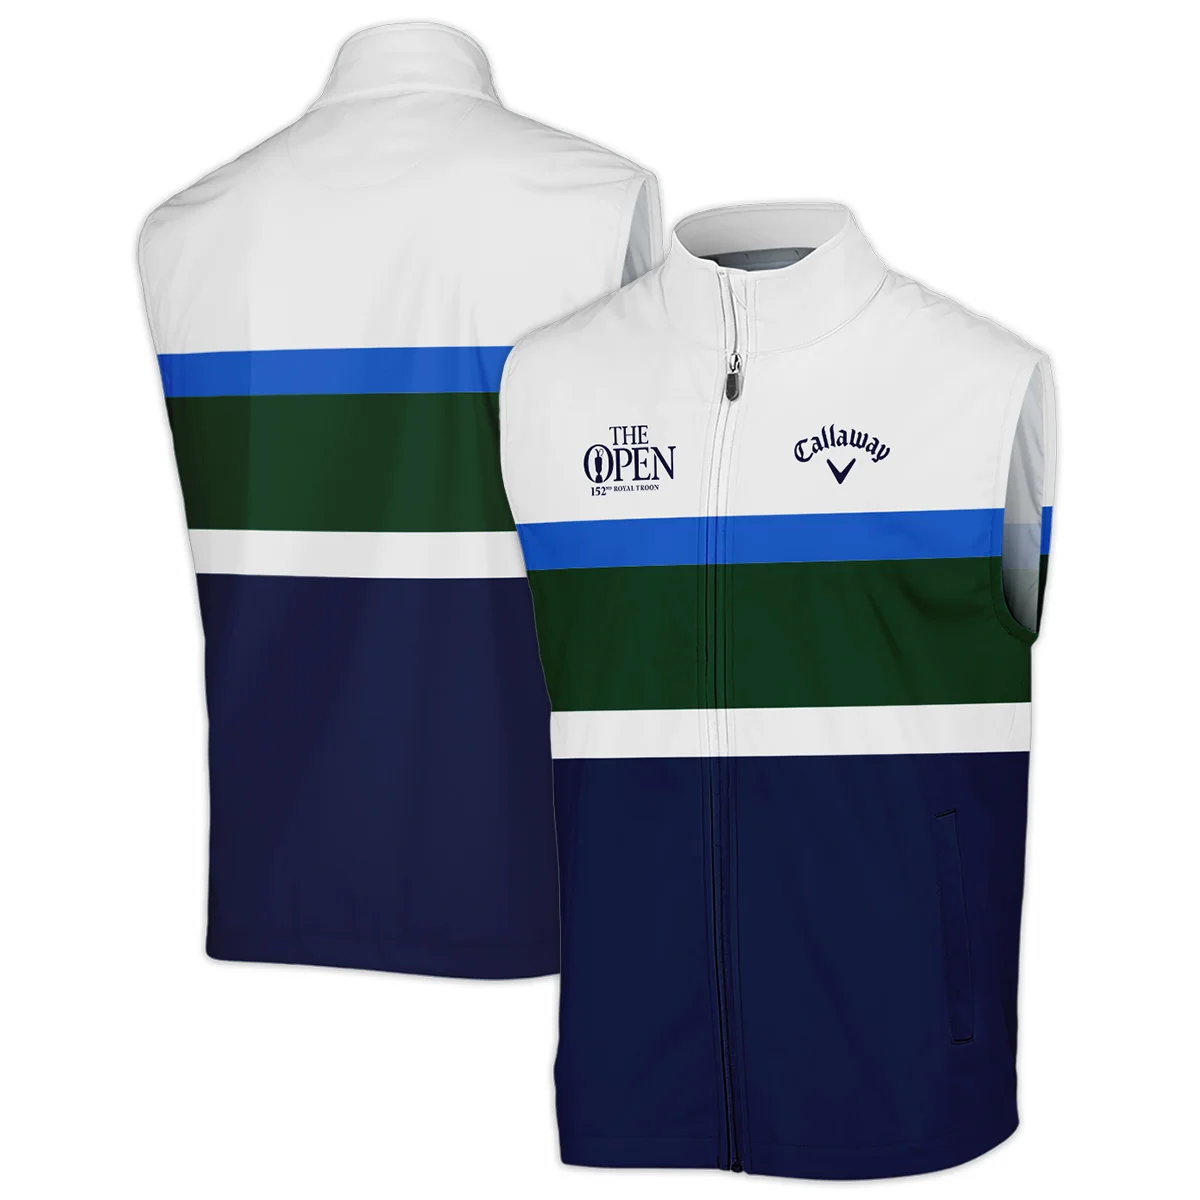 White Blue Green Background Callaway 152nd Open Championship Hoodie Shirt All Over Prints HOTOP270624A01CLWHD